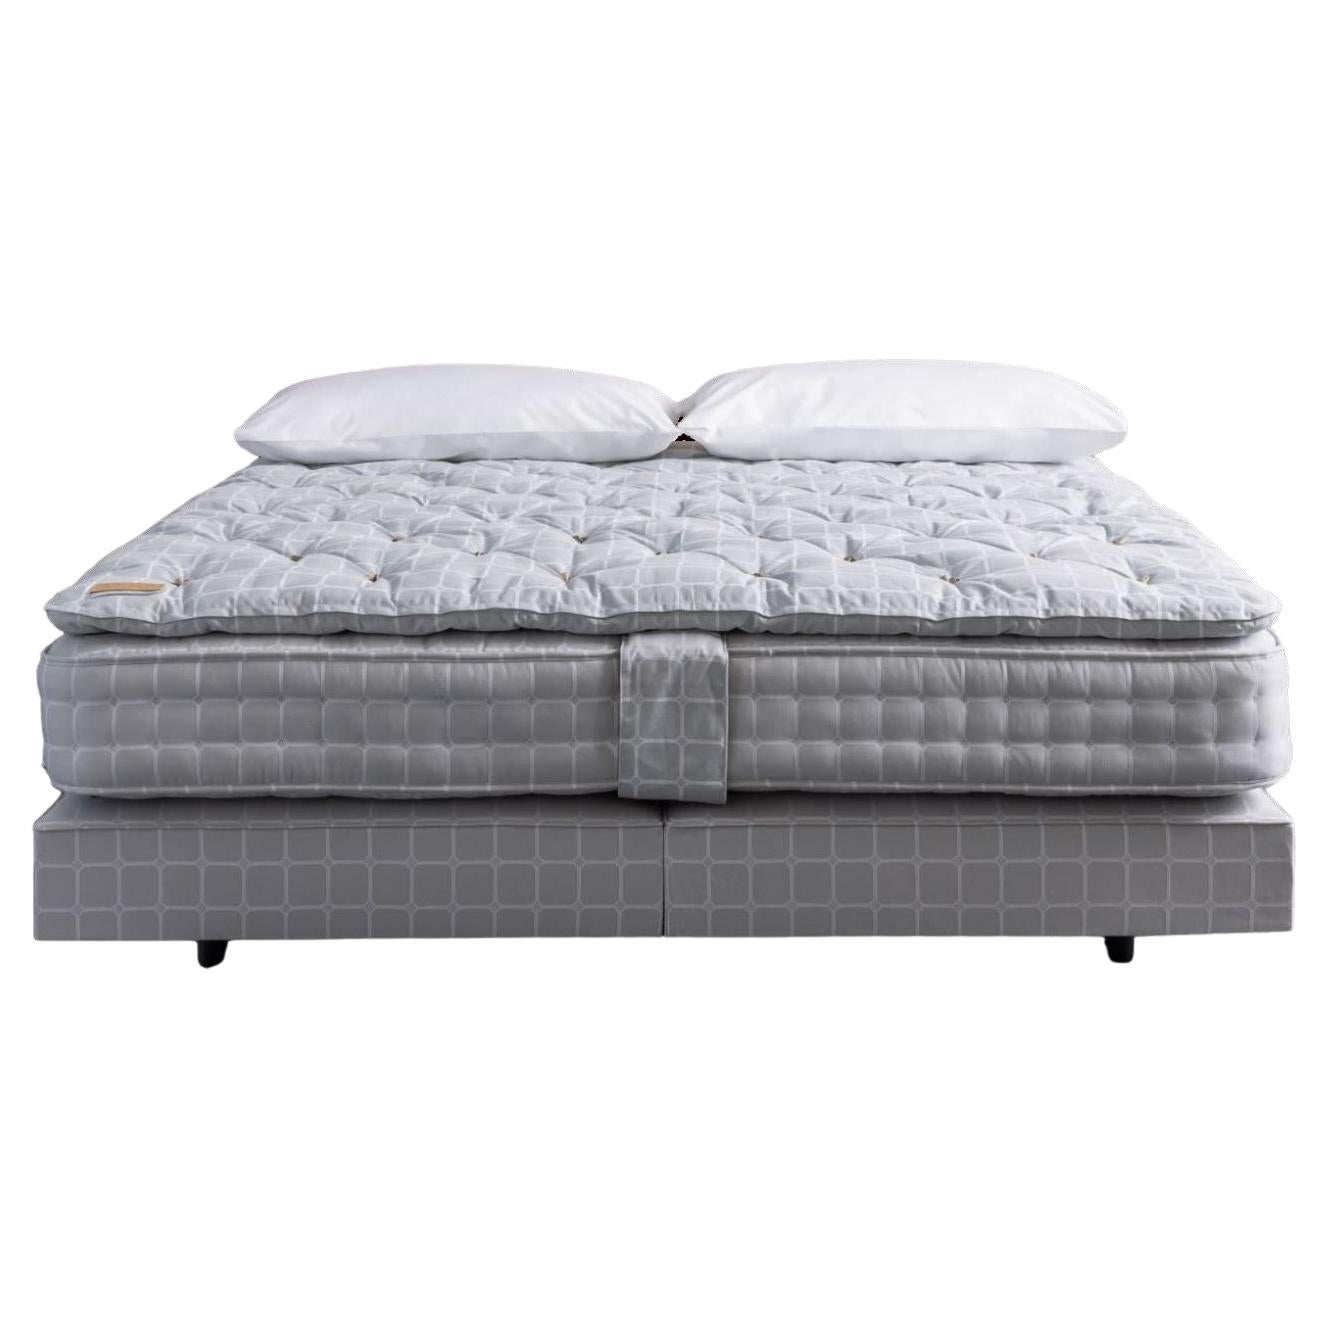 Savoir Nº5 Bed Set, Handmade in Wales, US Queen Size For Sale